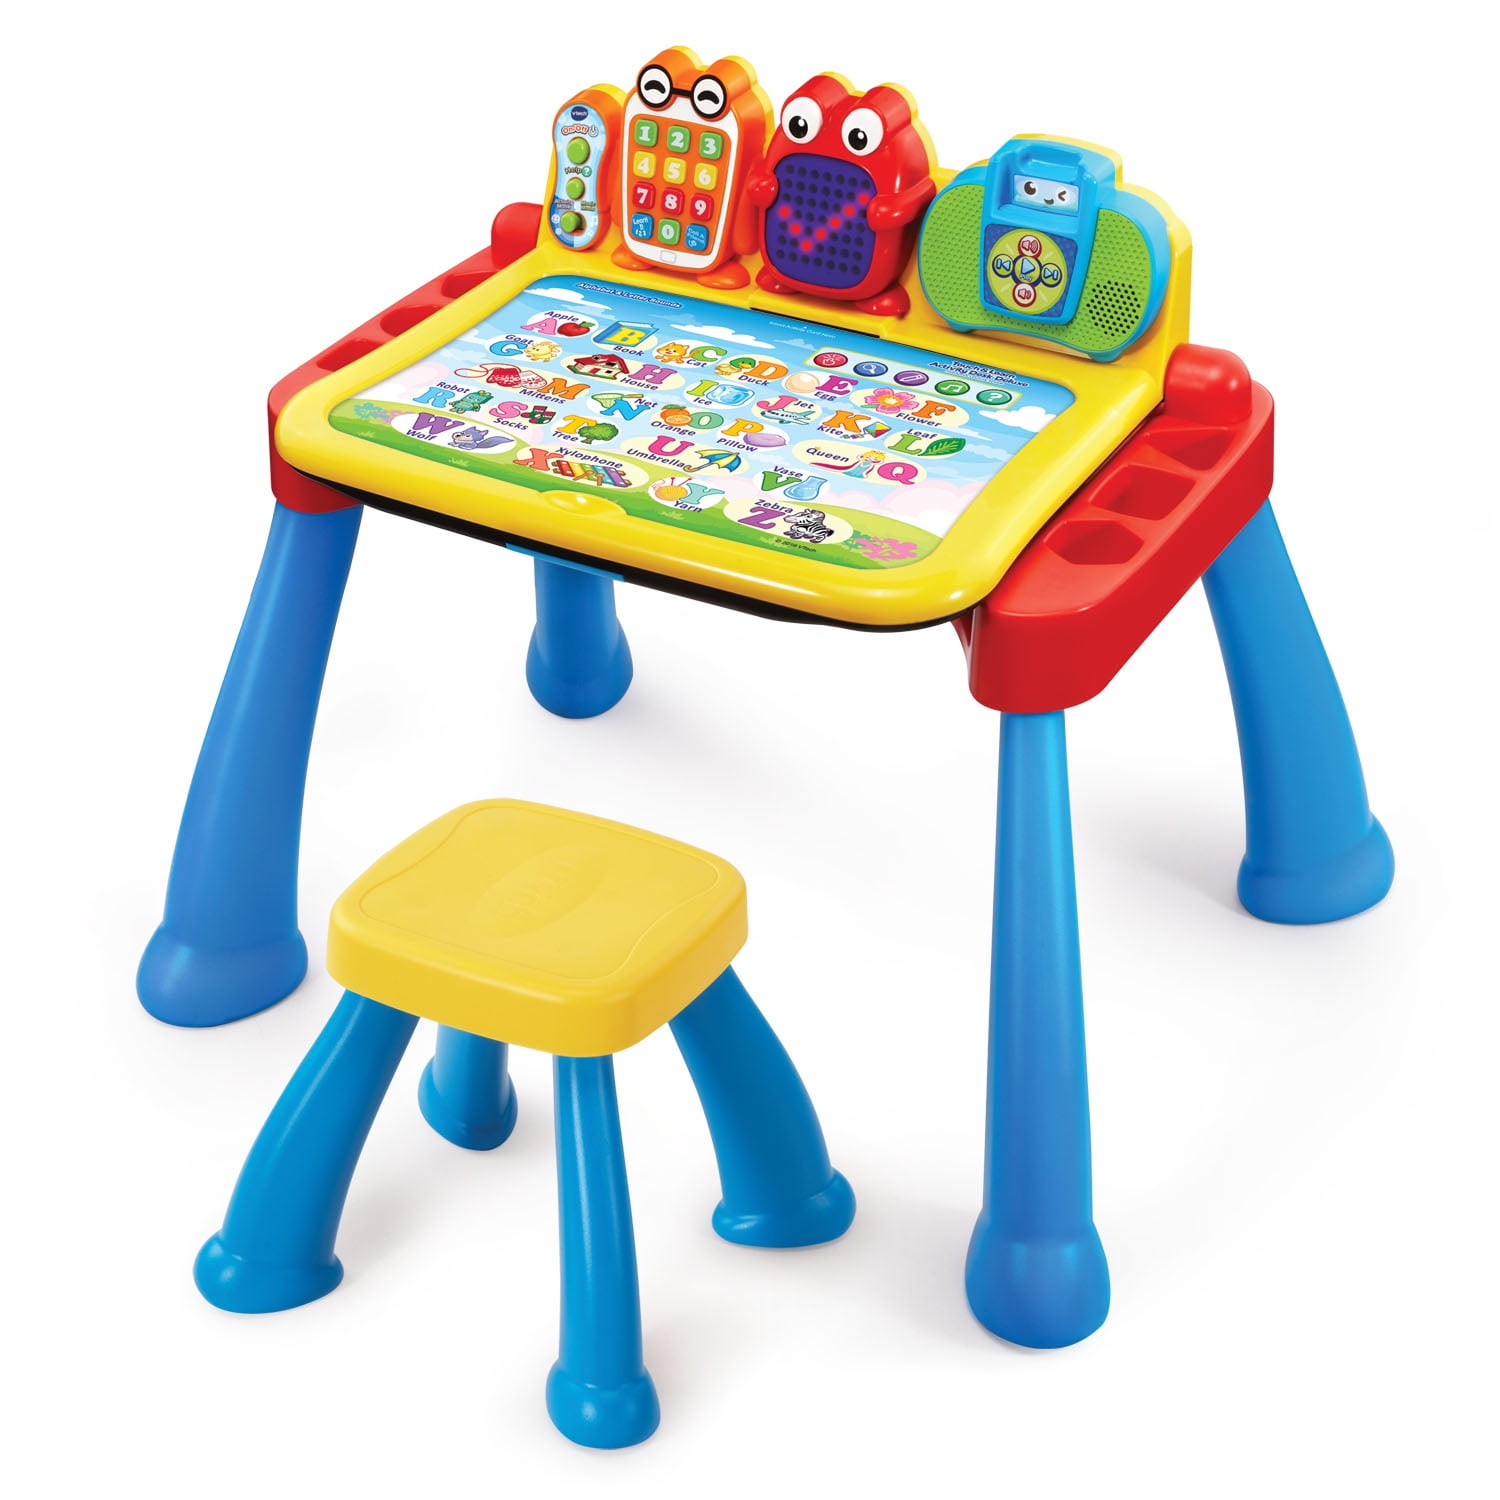 Sunshine Day Activity Table - Best Baby Toys & Gifts for Babies